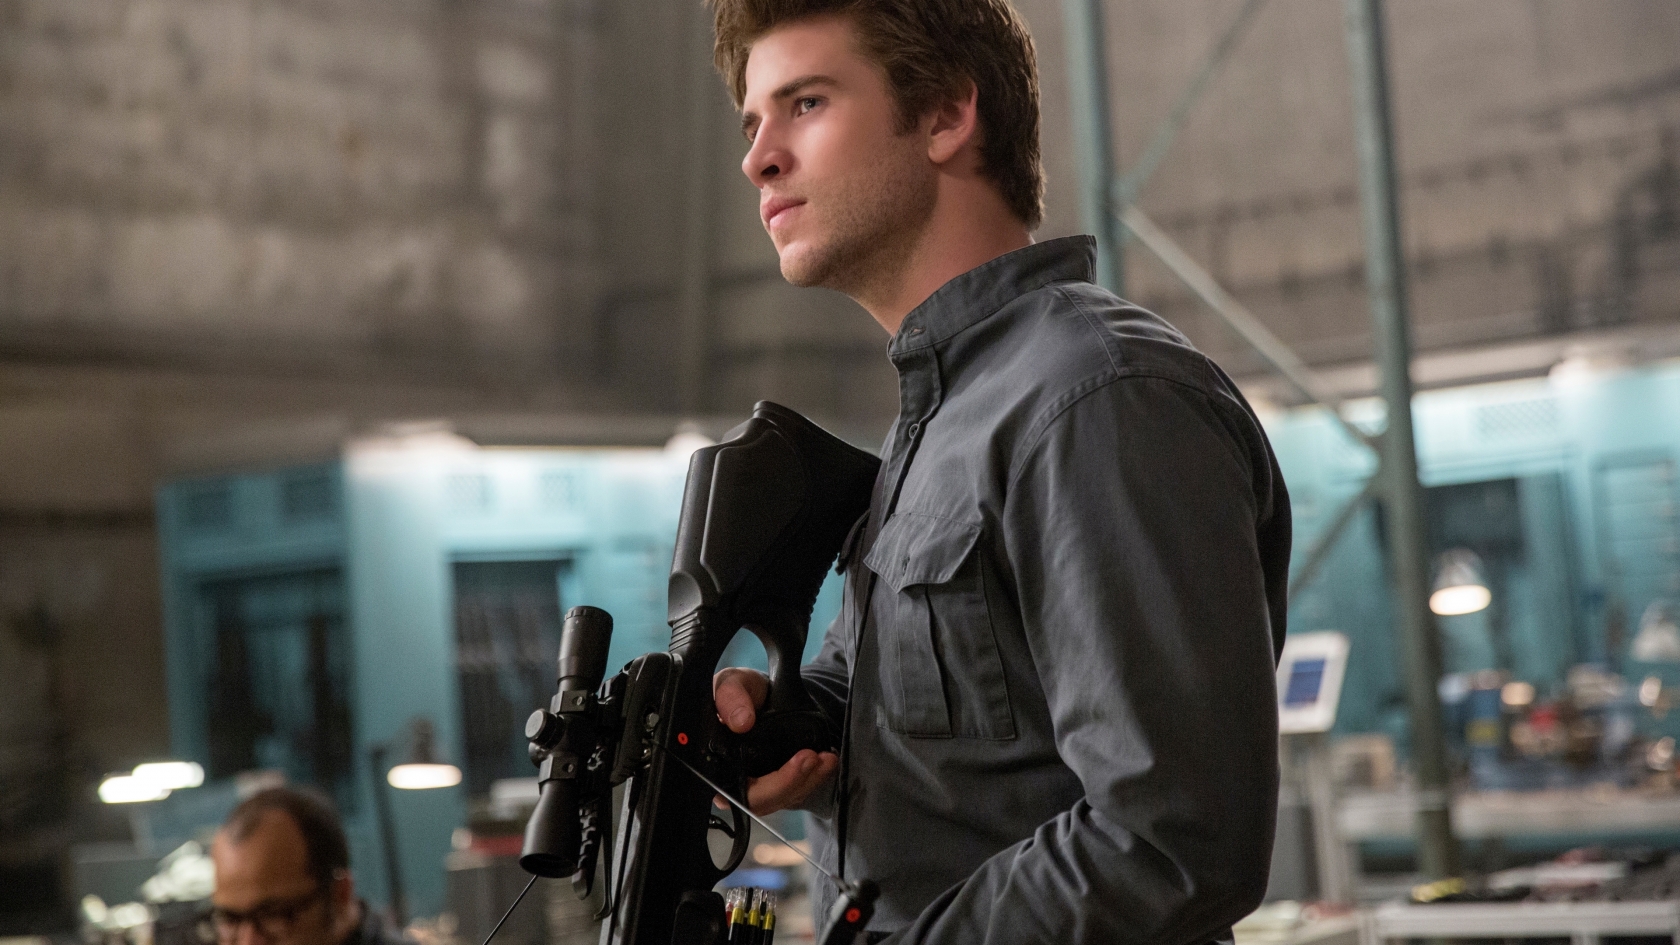 Liam Hemsworth in The Hunger Games for 1680 x 945 HDTV resolution